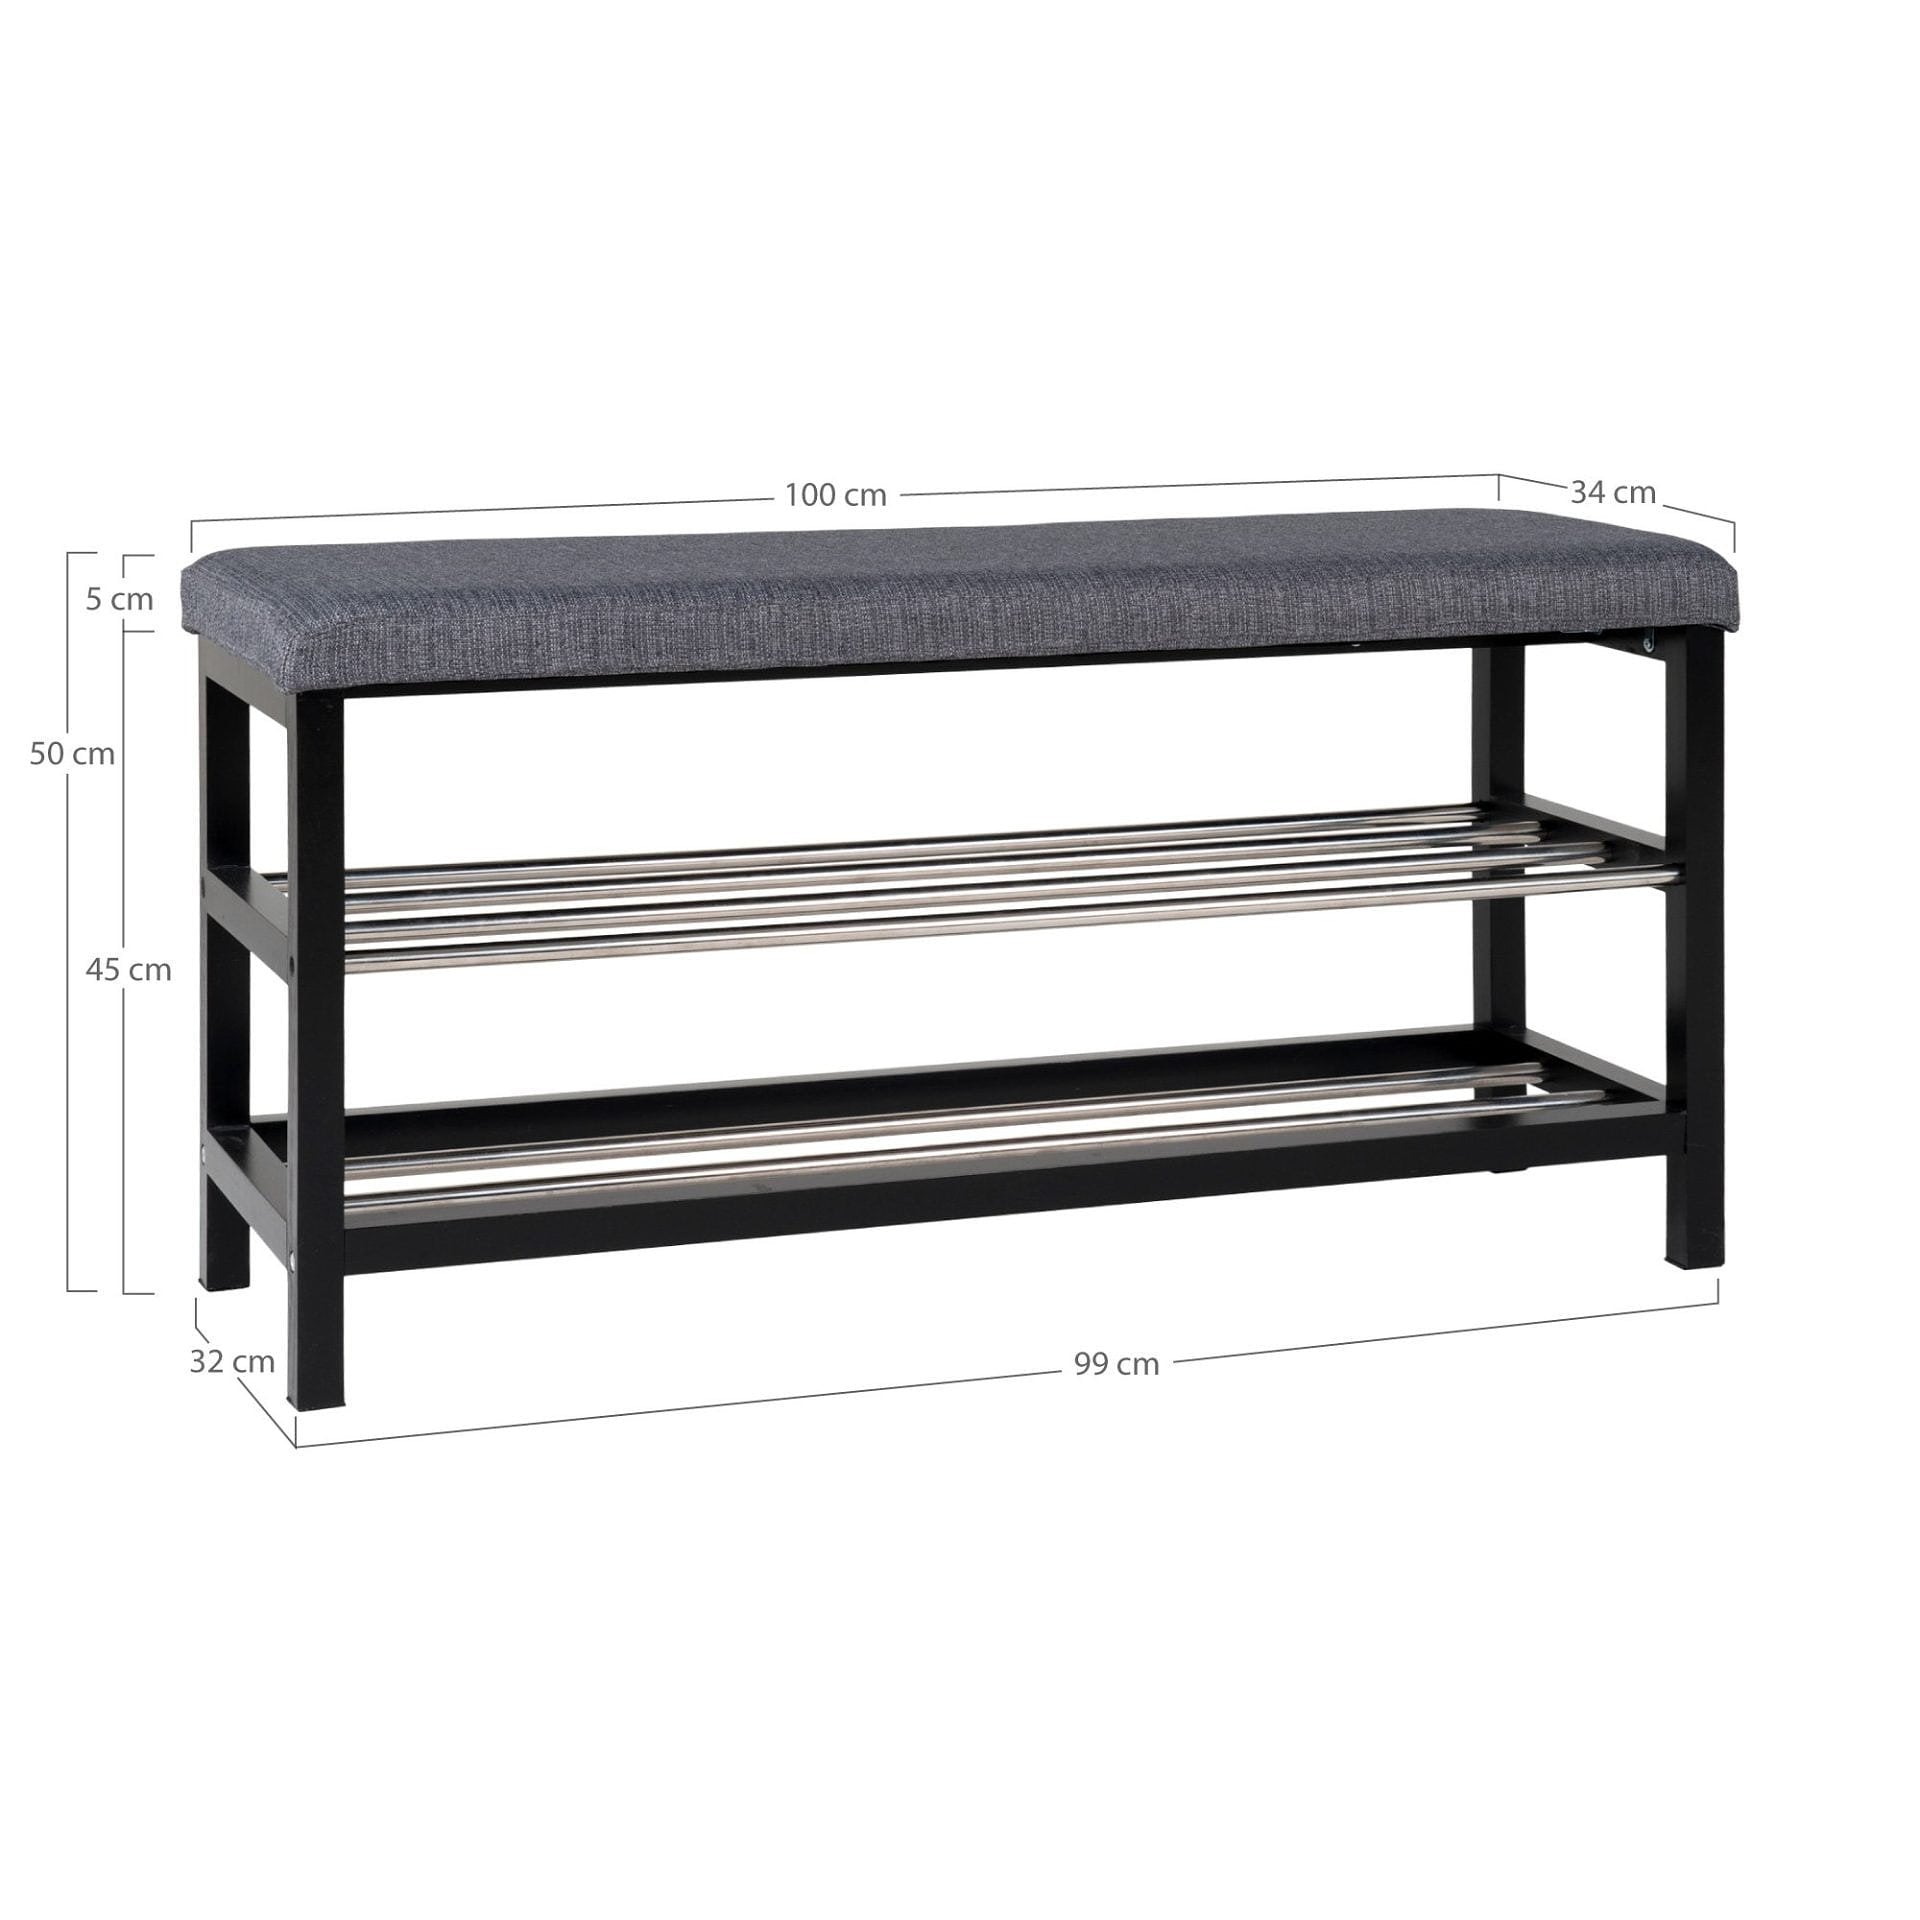 Padova Bench - Bench In Grey And Black With Cushion And Two Shelves